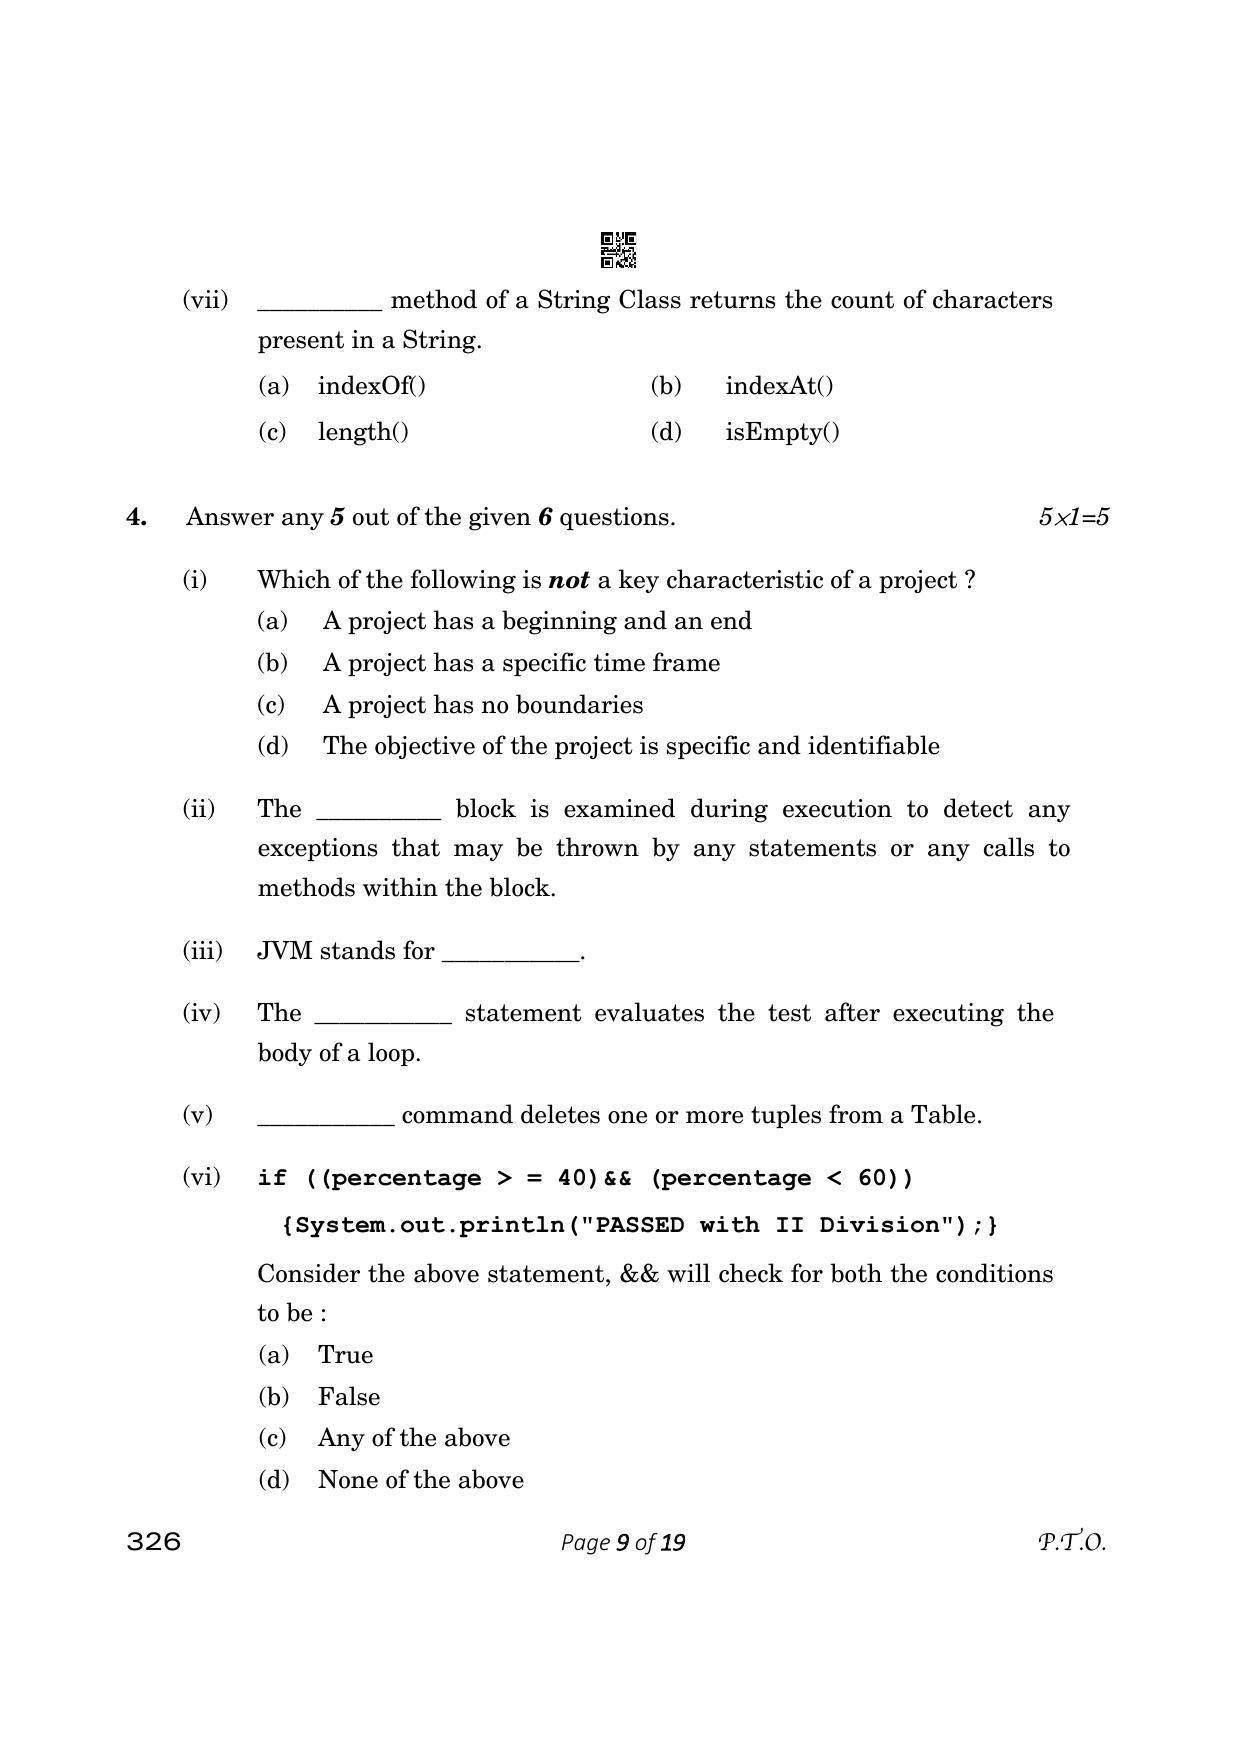 CBSE Class 12 Information Technology (Compartment) 2023 Question Paper - Page 9